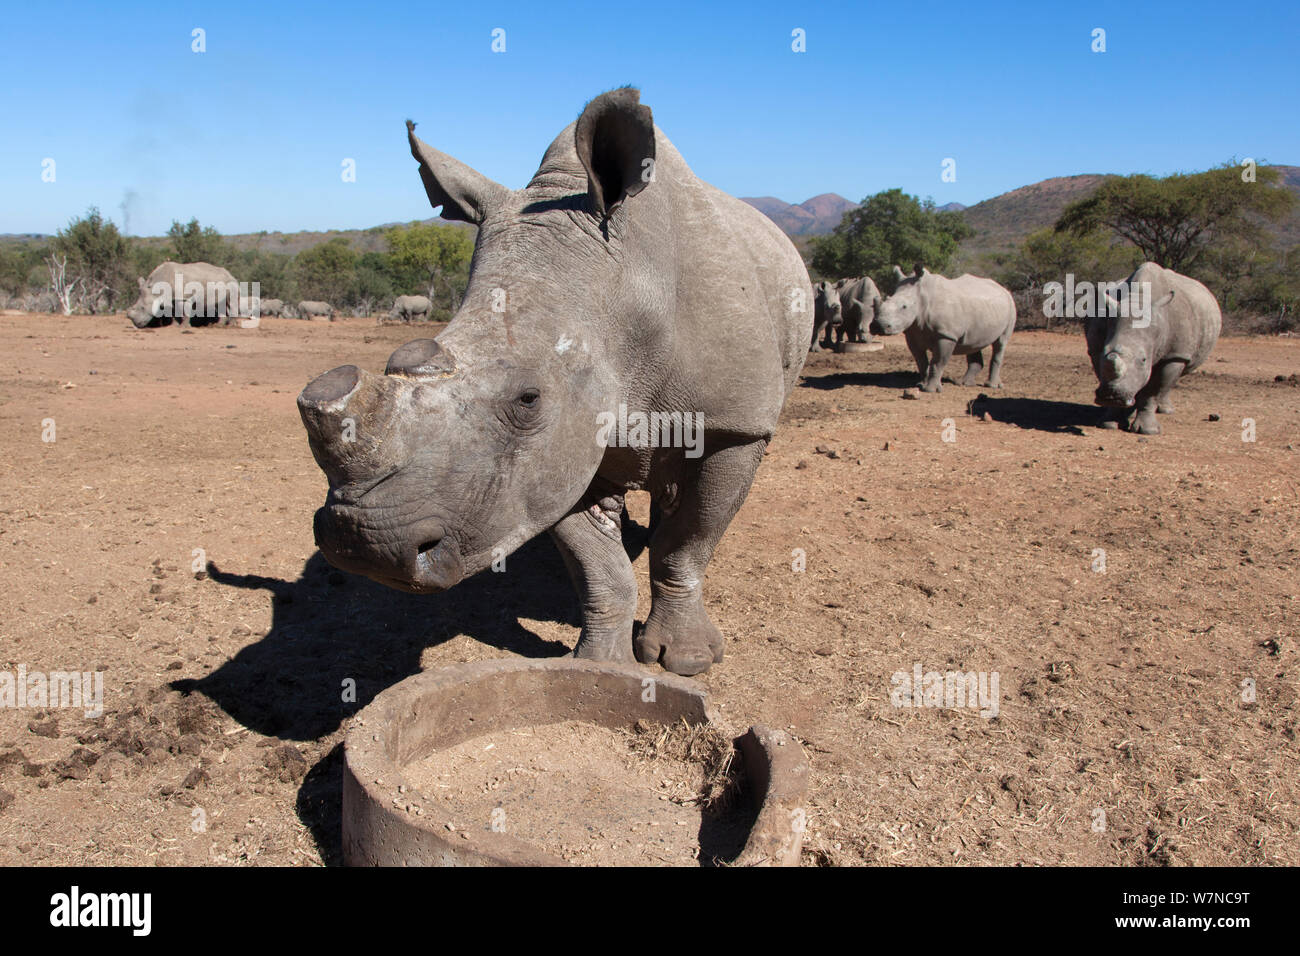 Dehorned white rhino (Ceratotherium simum) at feeder, Mauricedale game ranch, Mpumalanga, South Africa, June 2012 Stock Photo